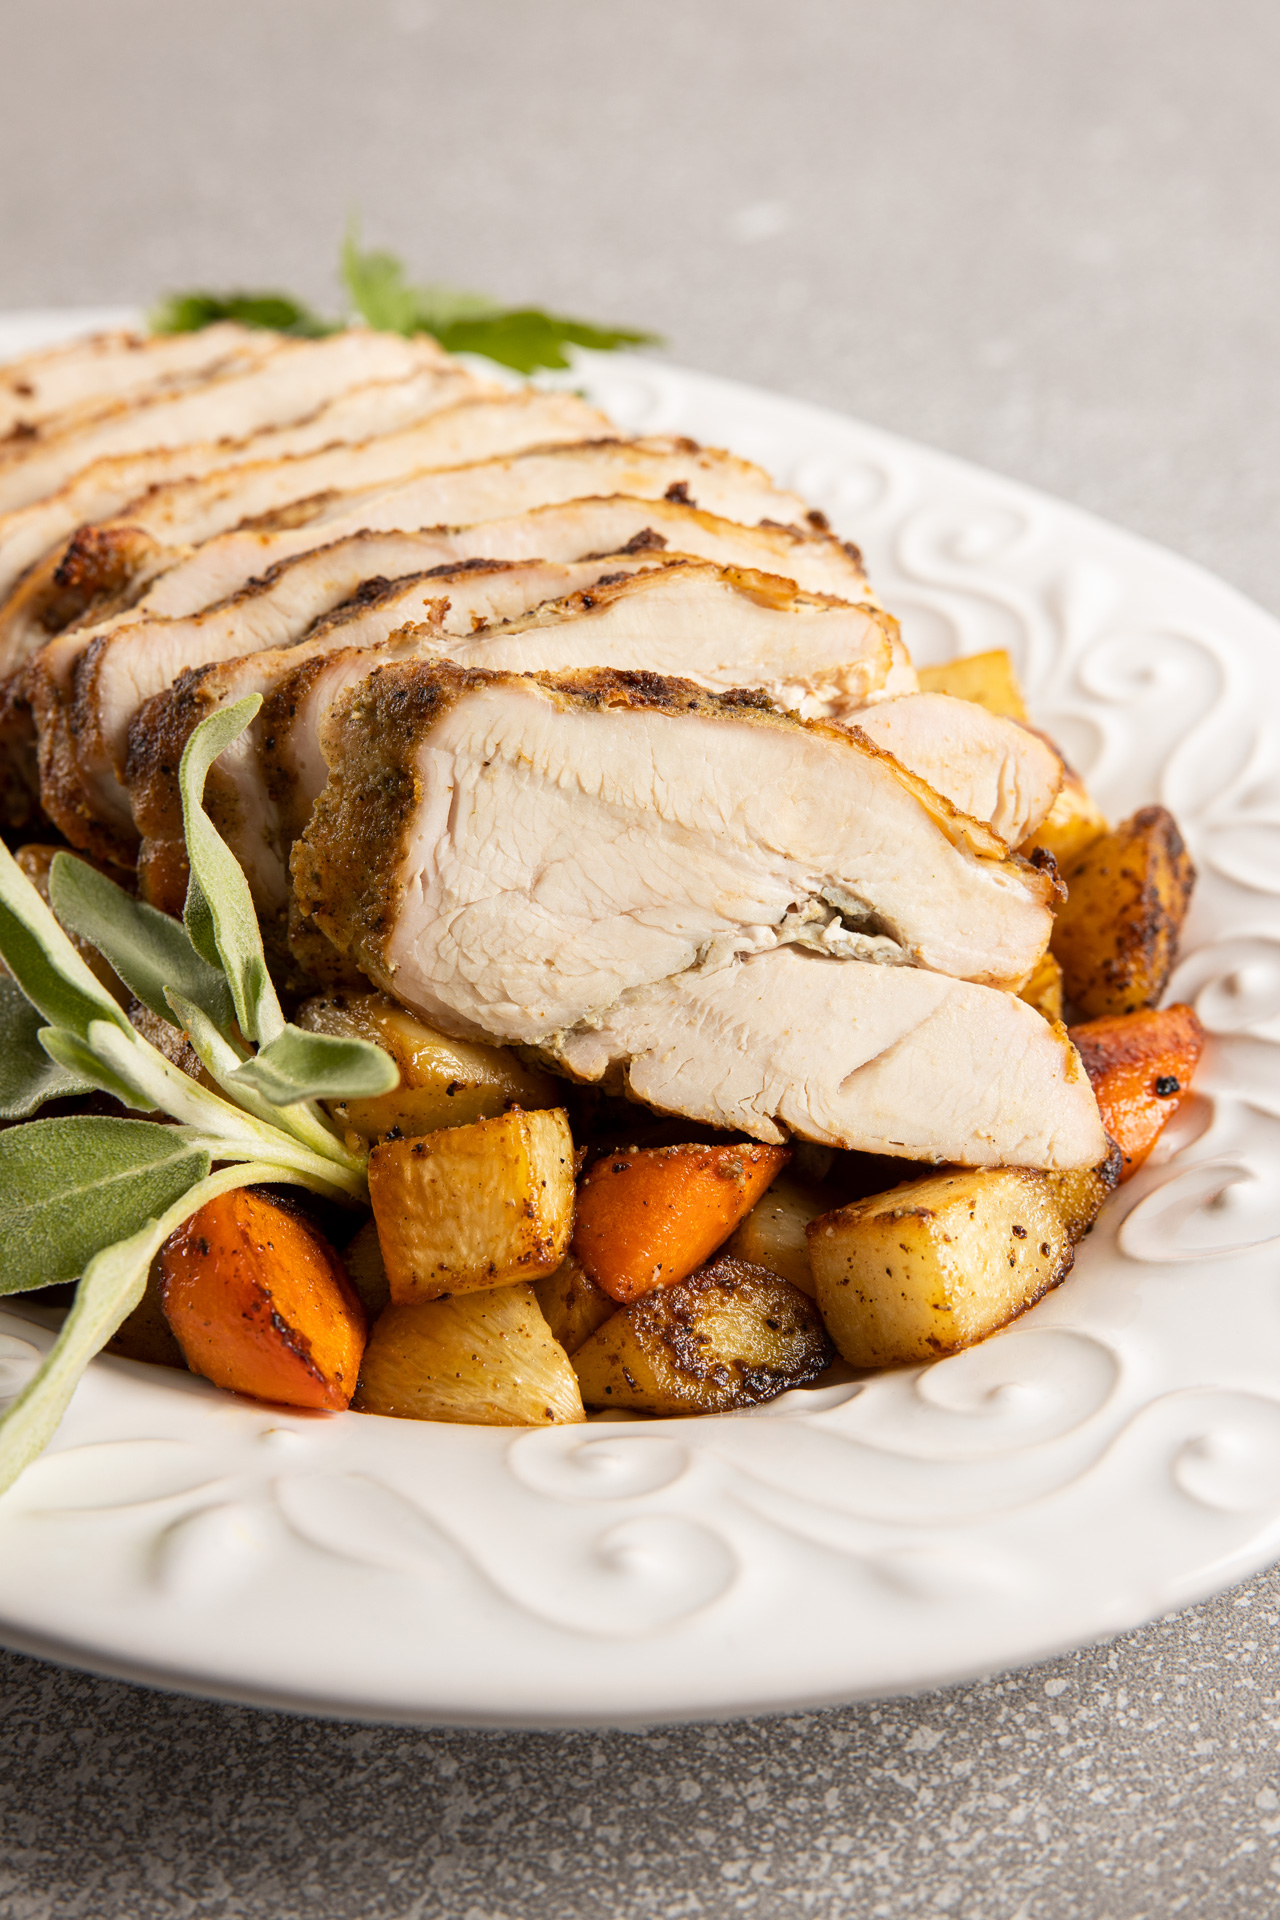 Pan-Roasted Turkey Breast with Caramelized Root Vegetables